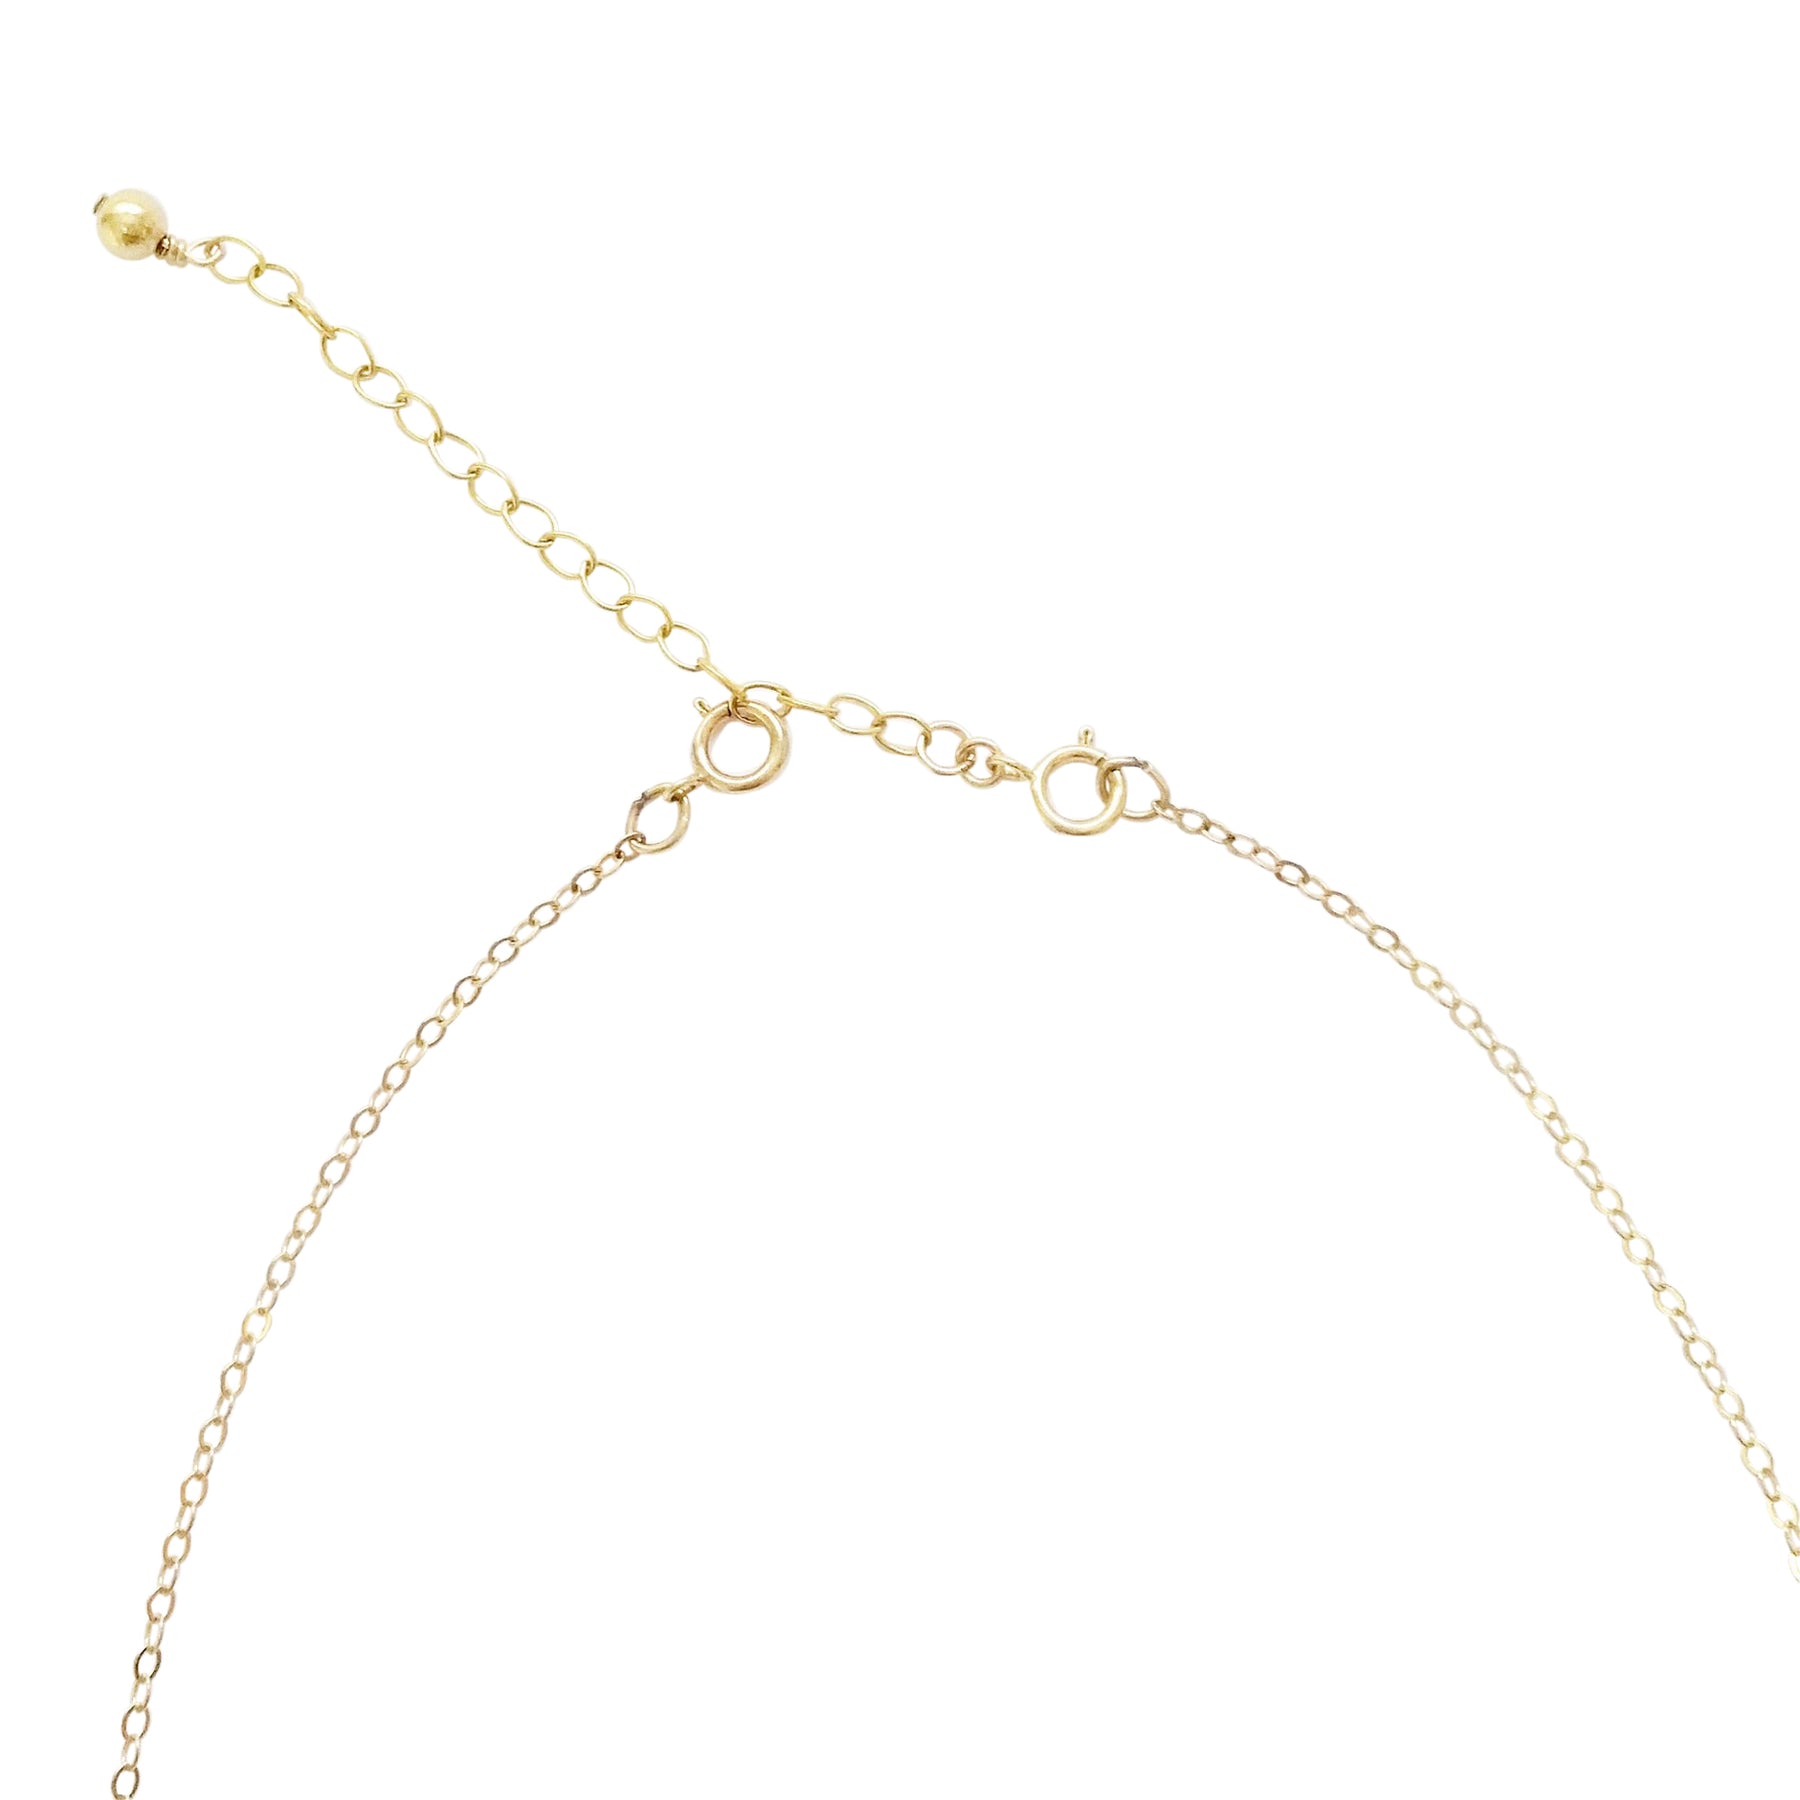  Lancharmed Gold Necklace Extender Double Lobster